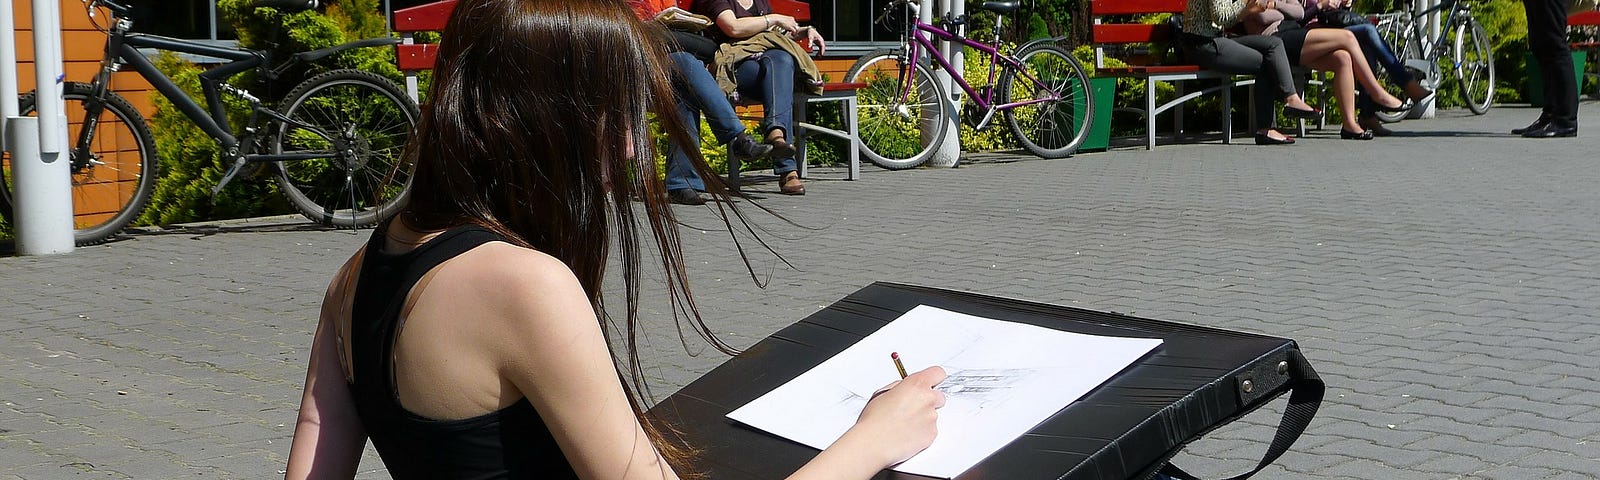 A young woman sketches outdoors, sitting on the ground. She is wearing a black tank top, jeans, and red sneakers